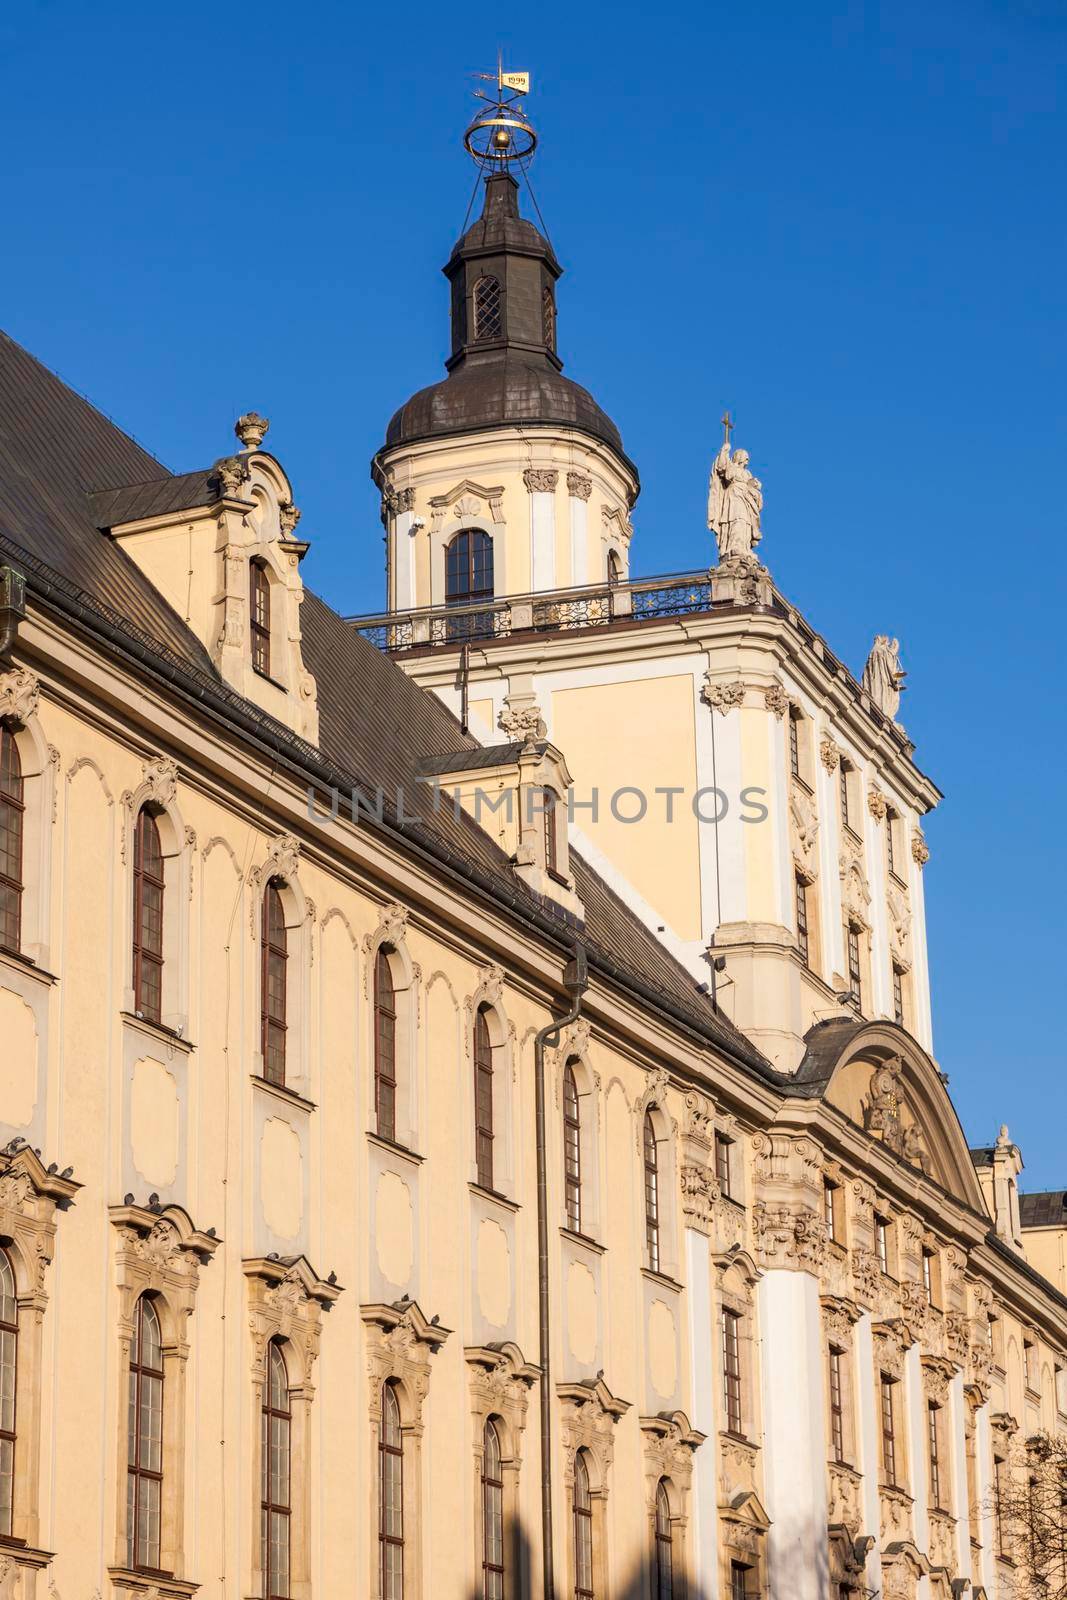  Wroclaw University building by benkrut